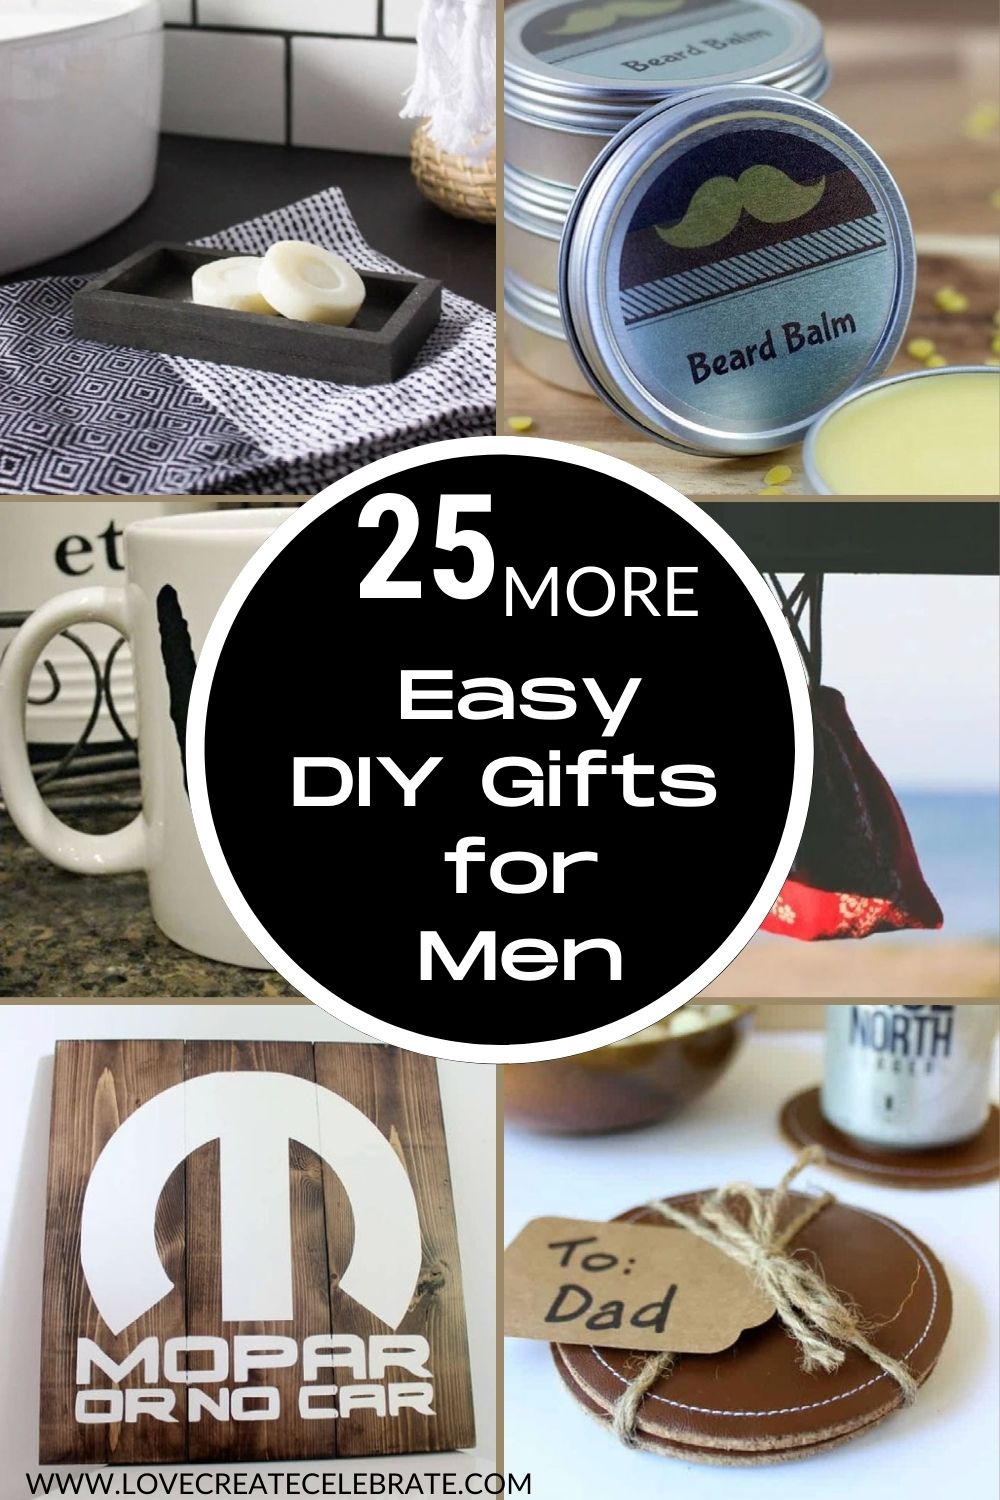 image collage of DIY gifts for men with text overlay